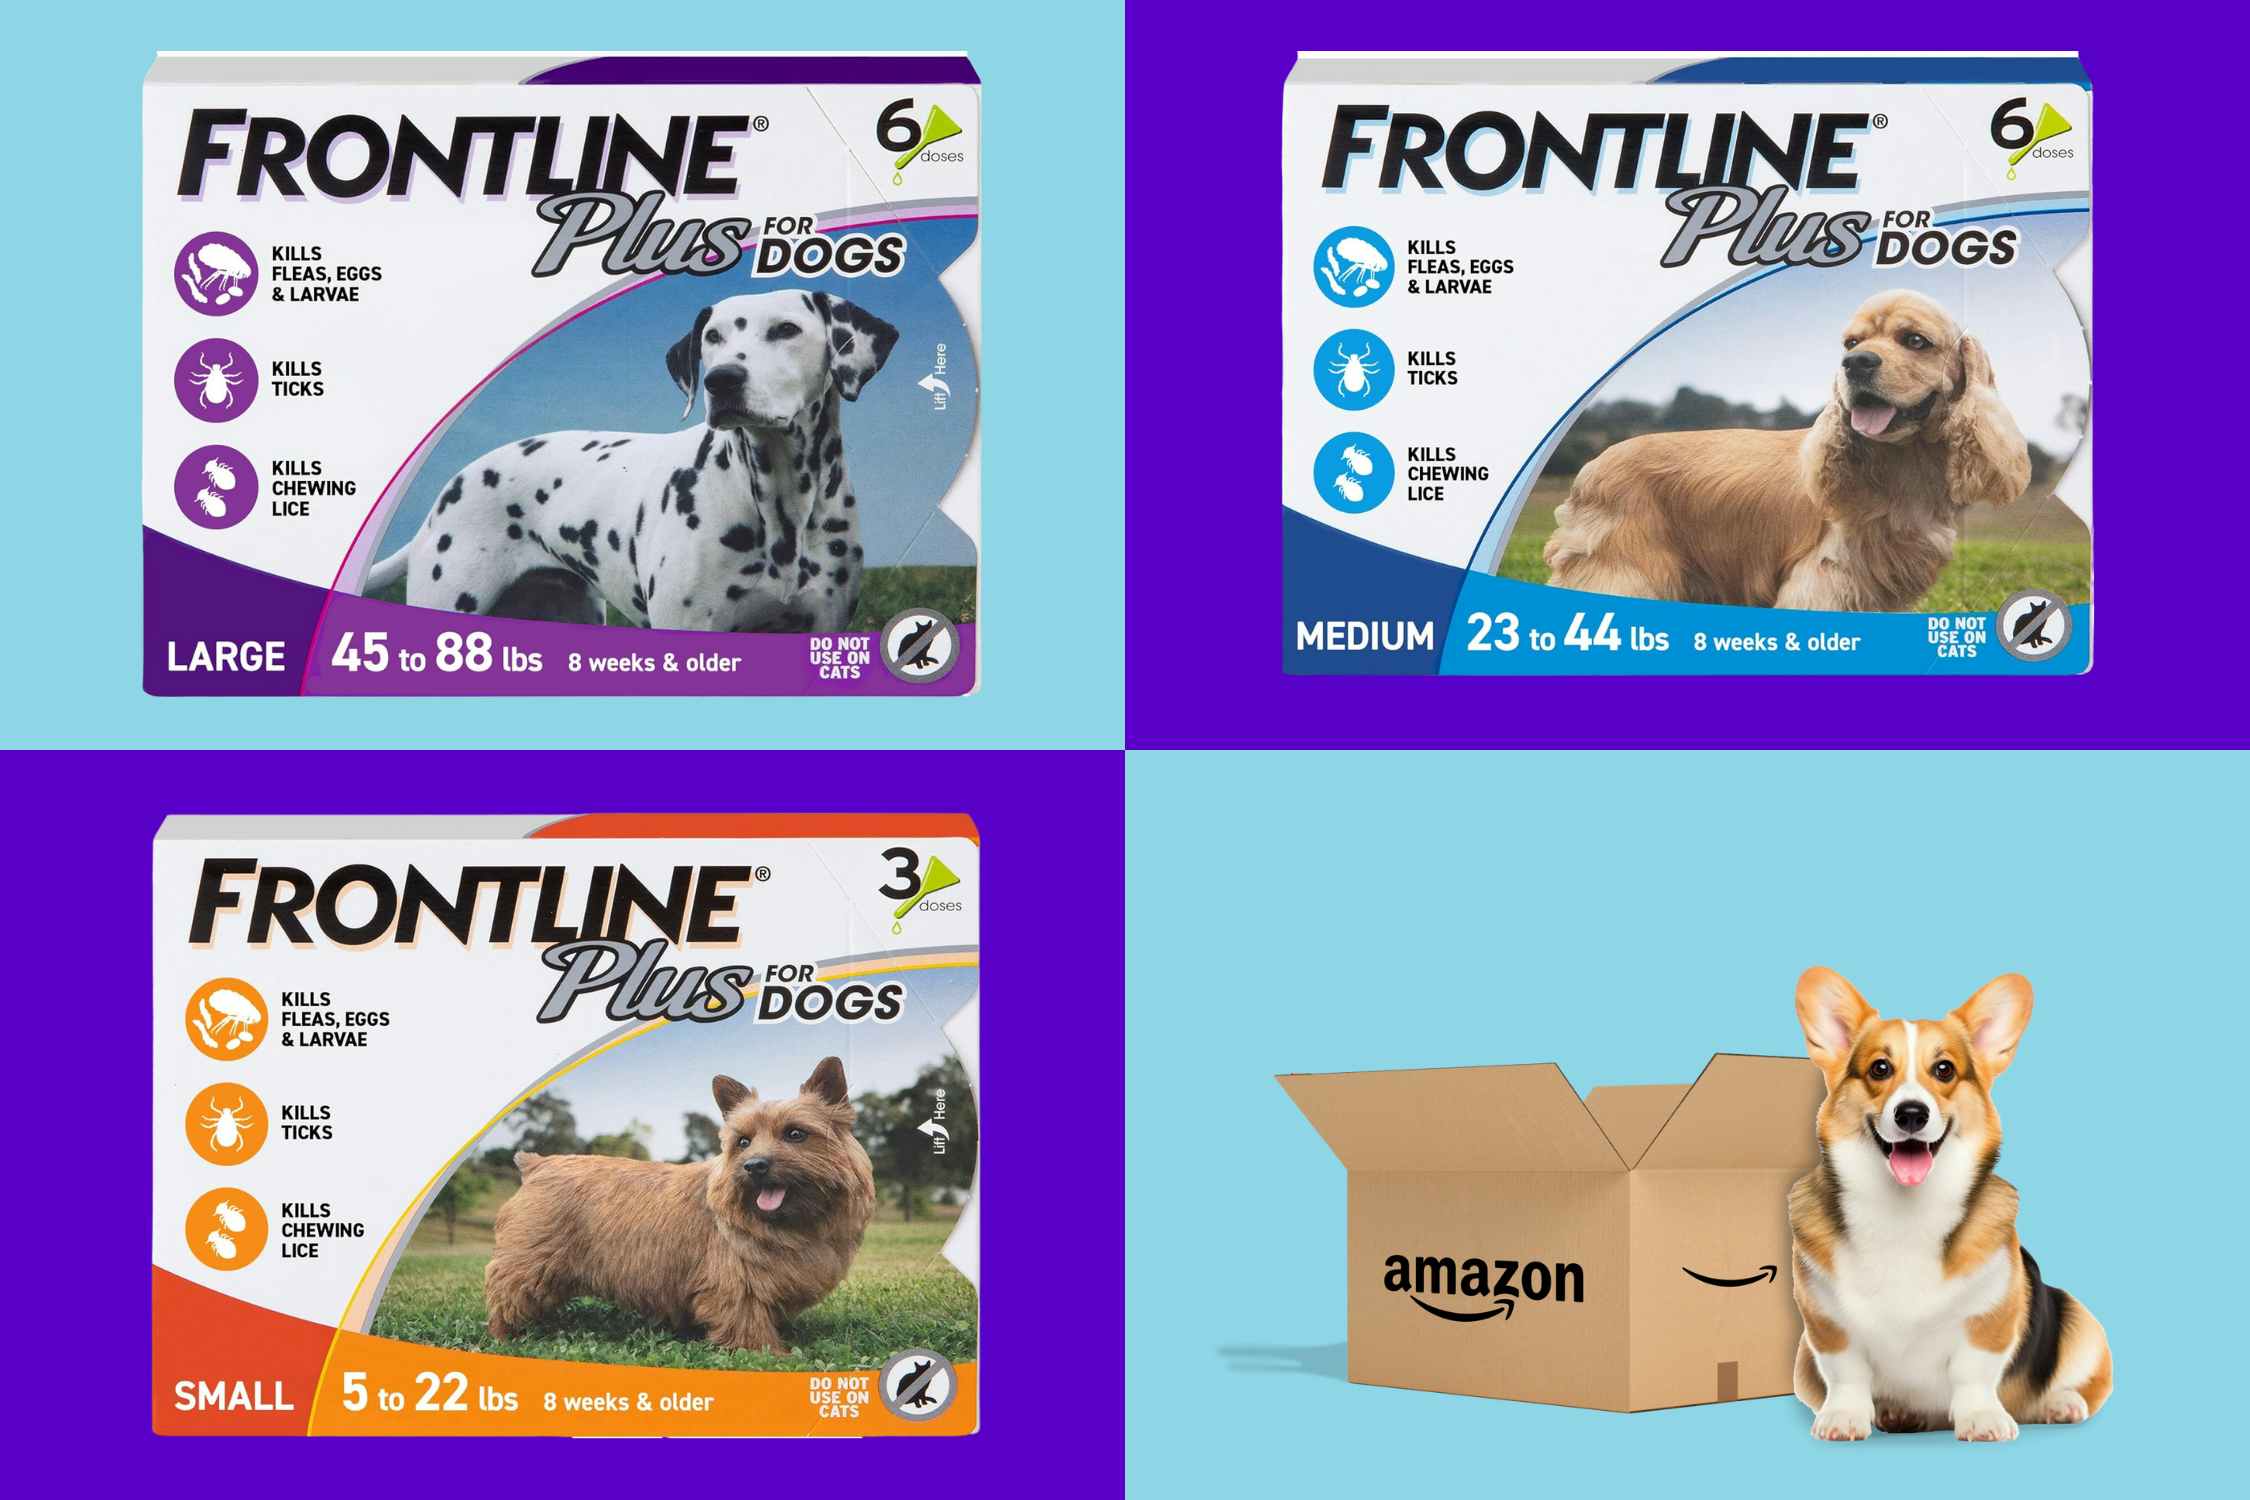 Frontline Plus Flea and Tick Treatments, as Low as $21.90 for Amazon Pet Day